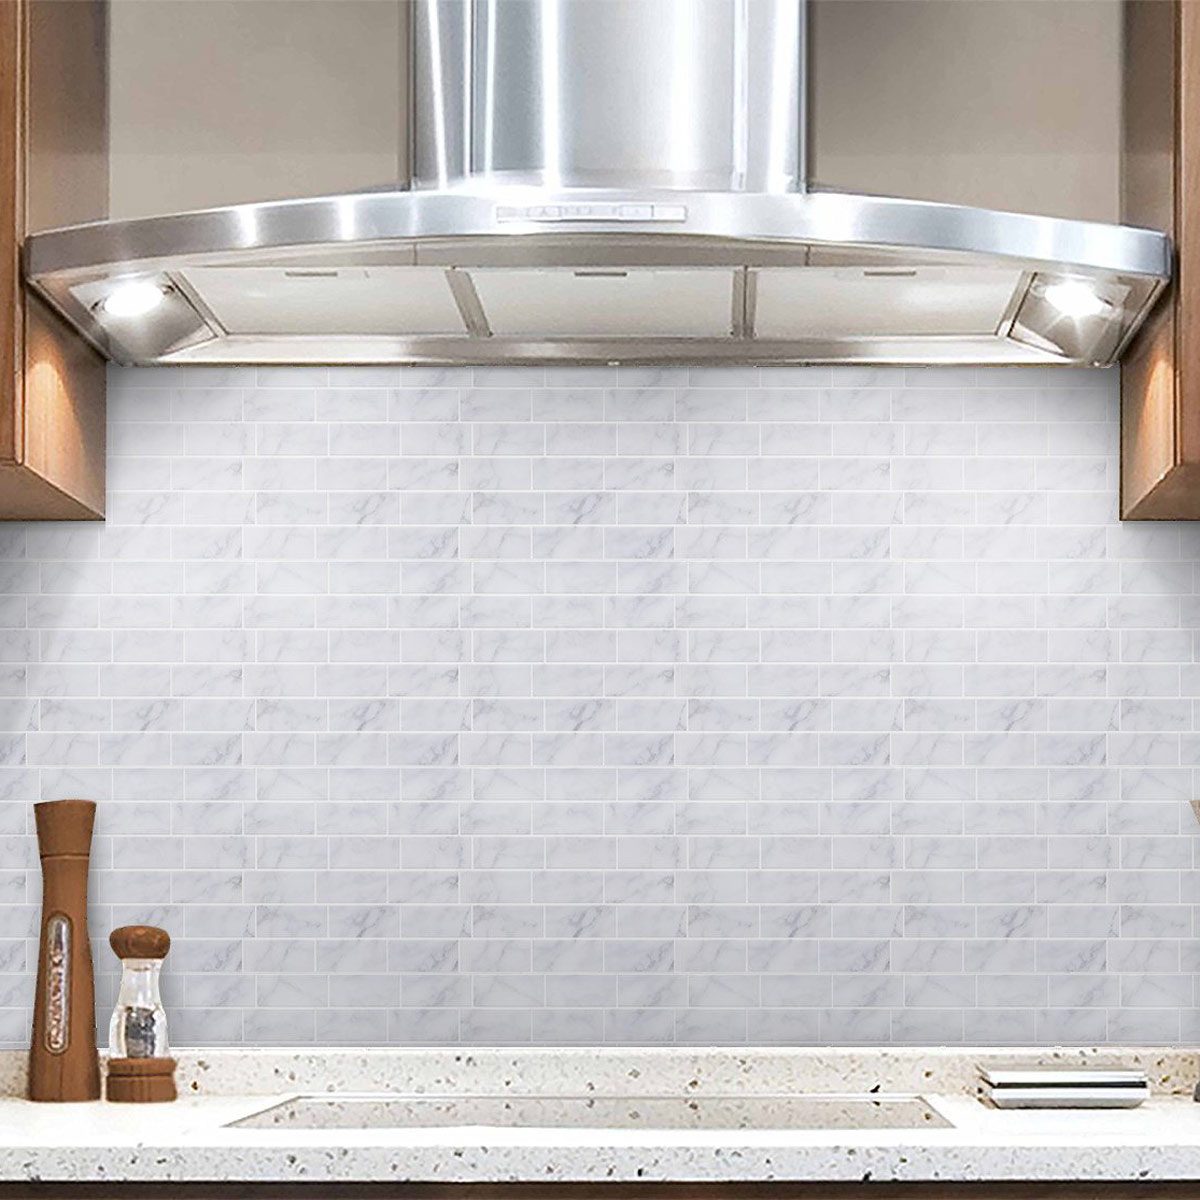 The 30 Backsplash Ideas Your Kitchen Can T Live Without